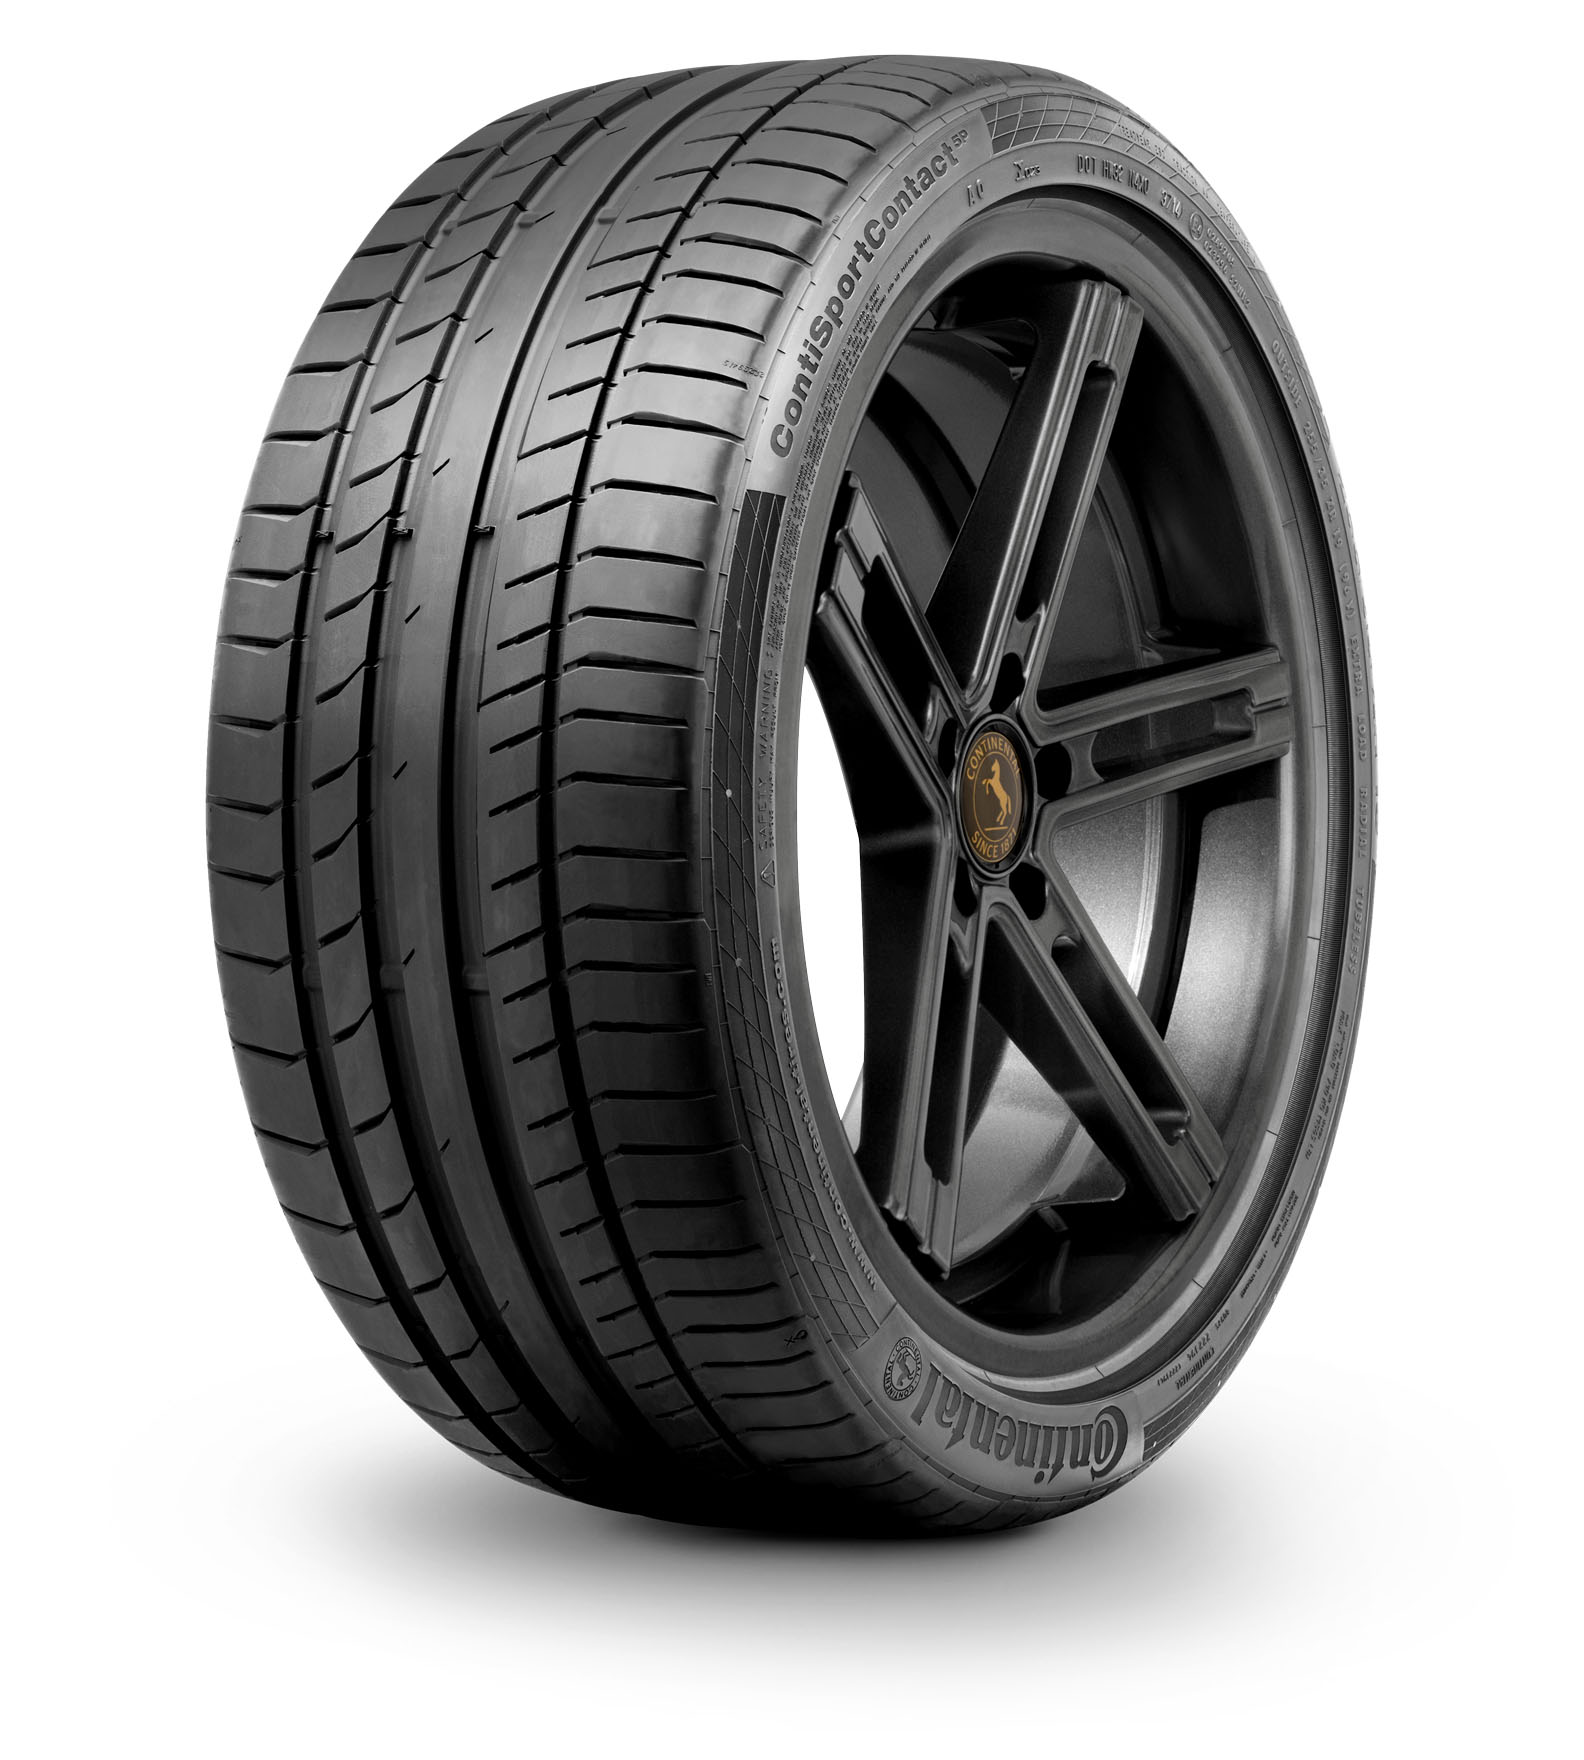 Continental 255/50R19 103W ContiSportContact™ 5 P MO DOT21